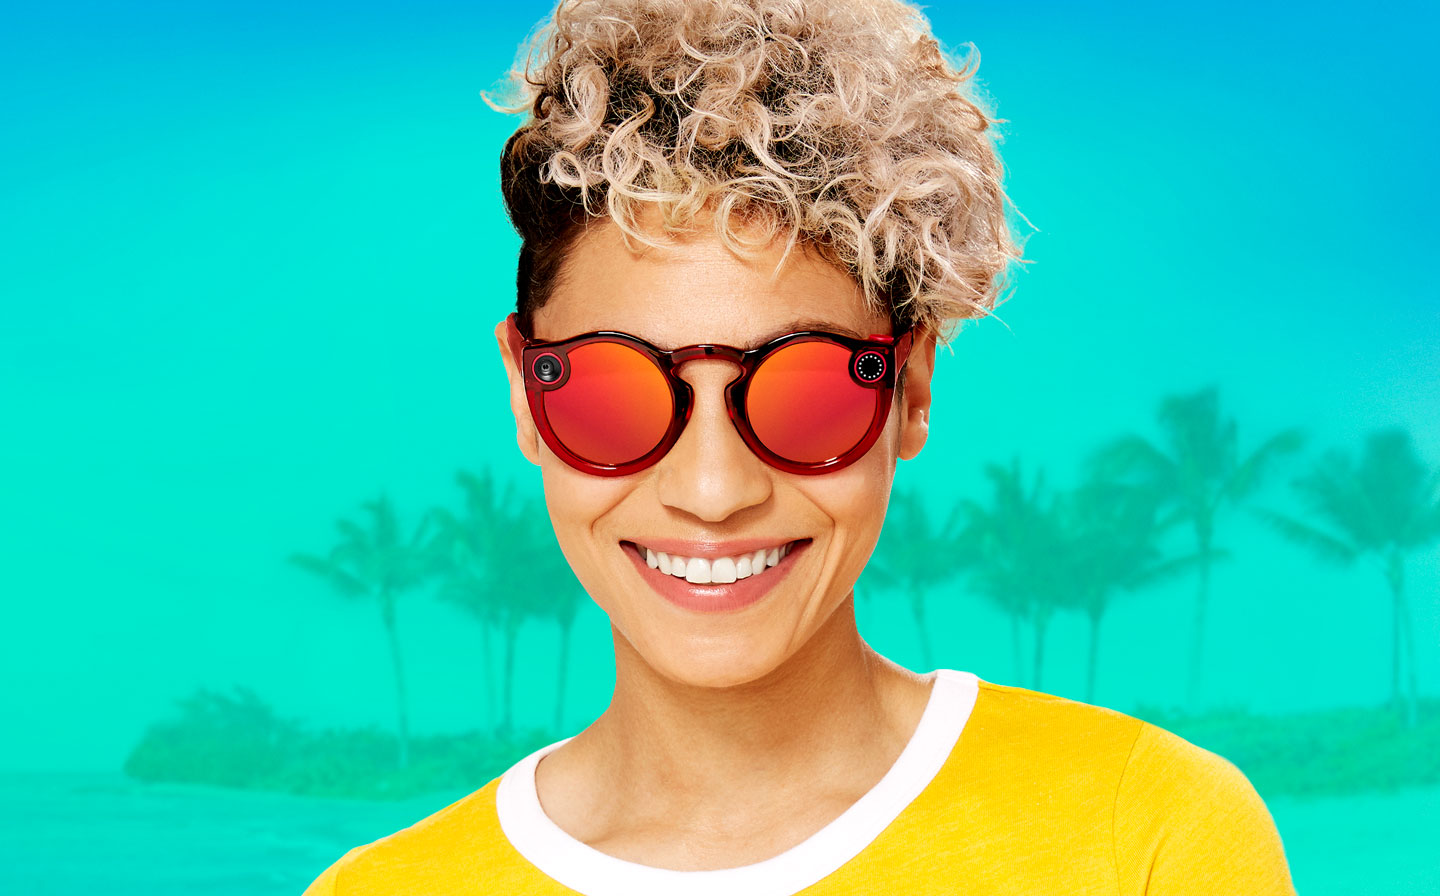 Snapchat Offers Precisely Zero Good Reasons Why You Should Buy Its New Spectacles